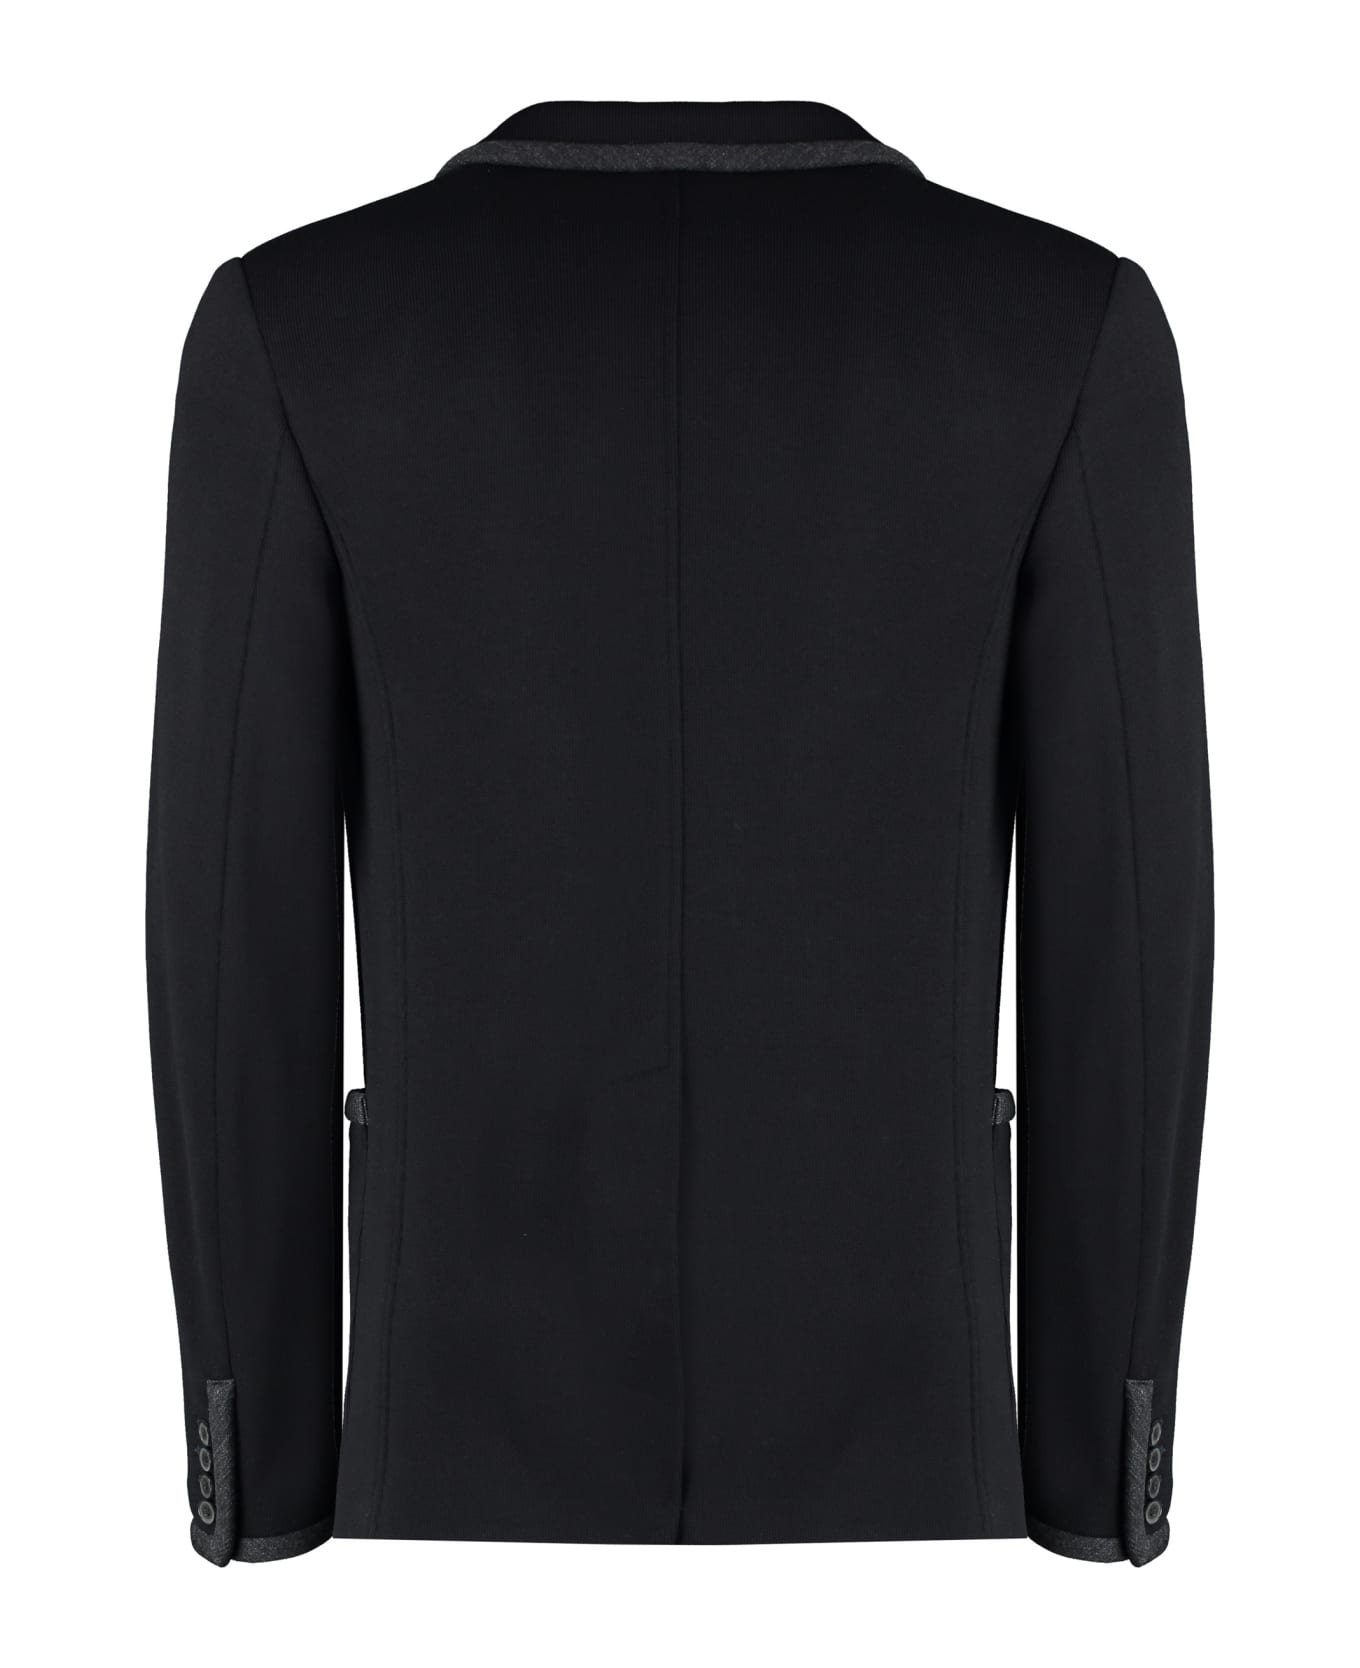 Valentino Single-breasted Two-button Jacket - black